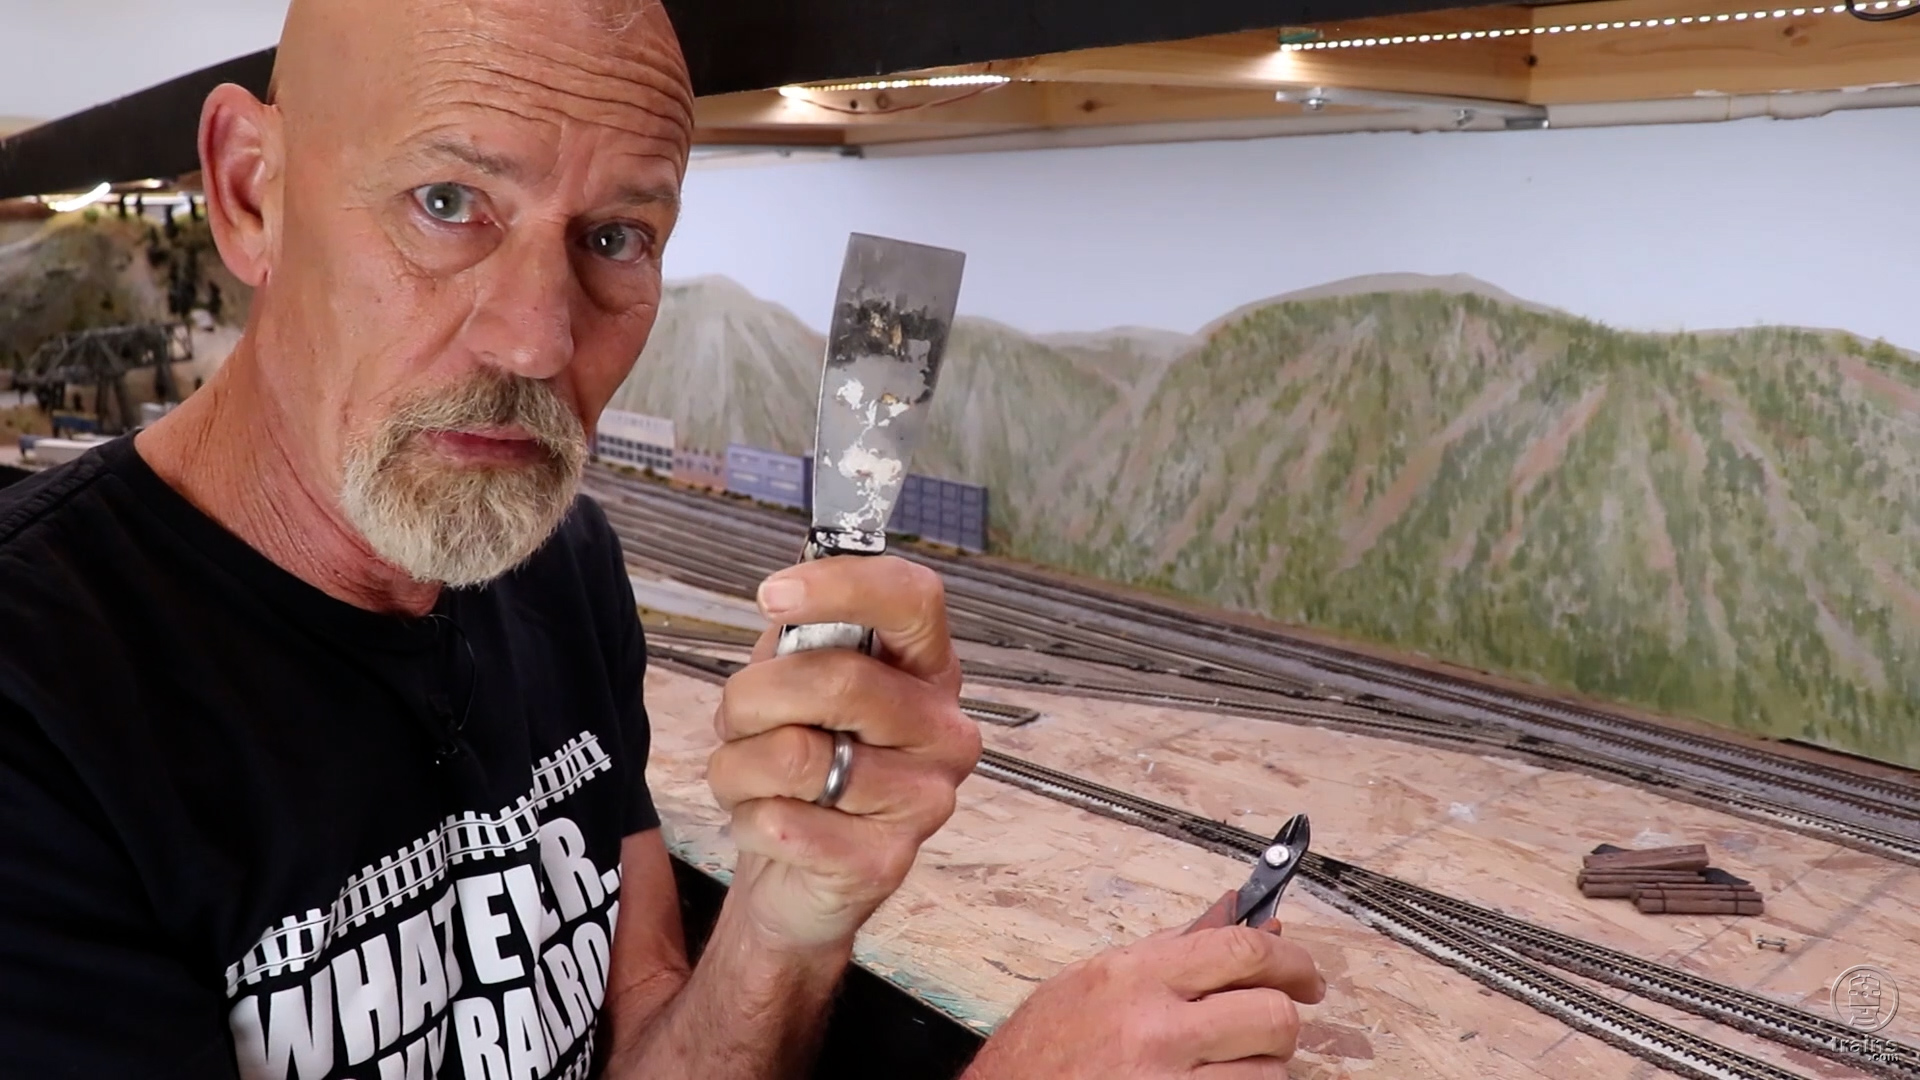 It’s My Railroad, Removing, restoring, reusing N scale track, Ep. 24